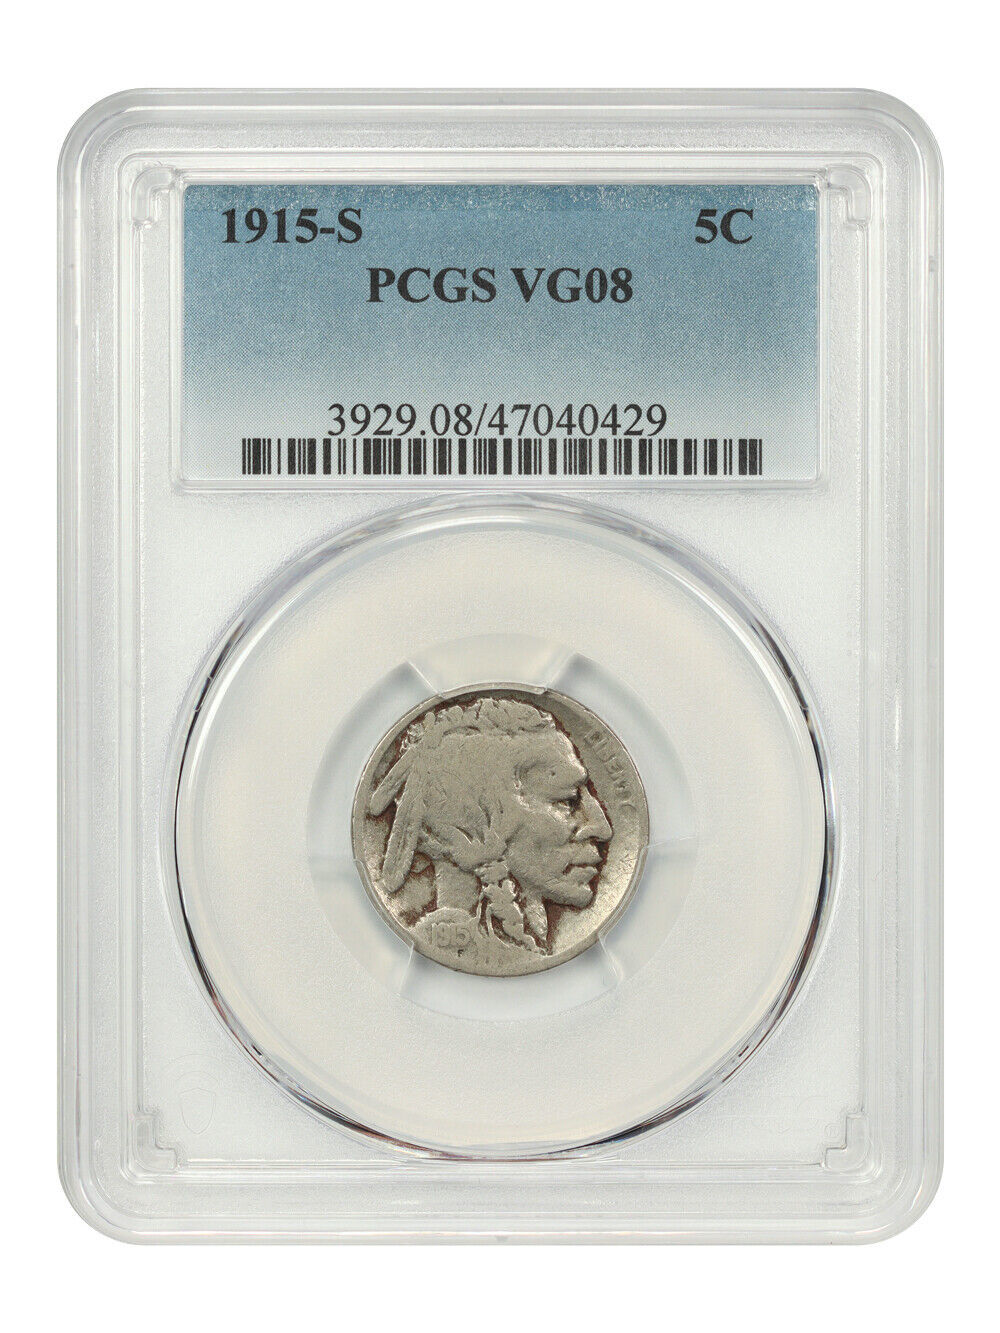 Primary image for 1915-S 5c PCGS VG-08